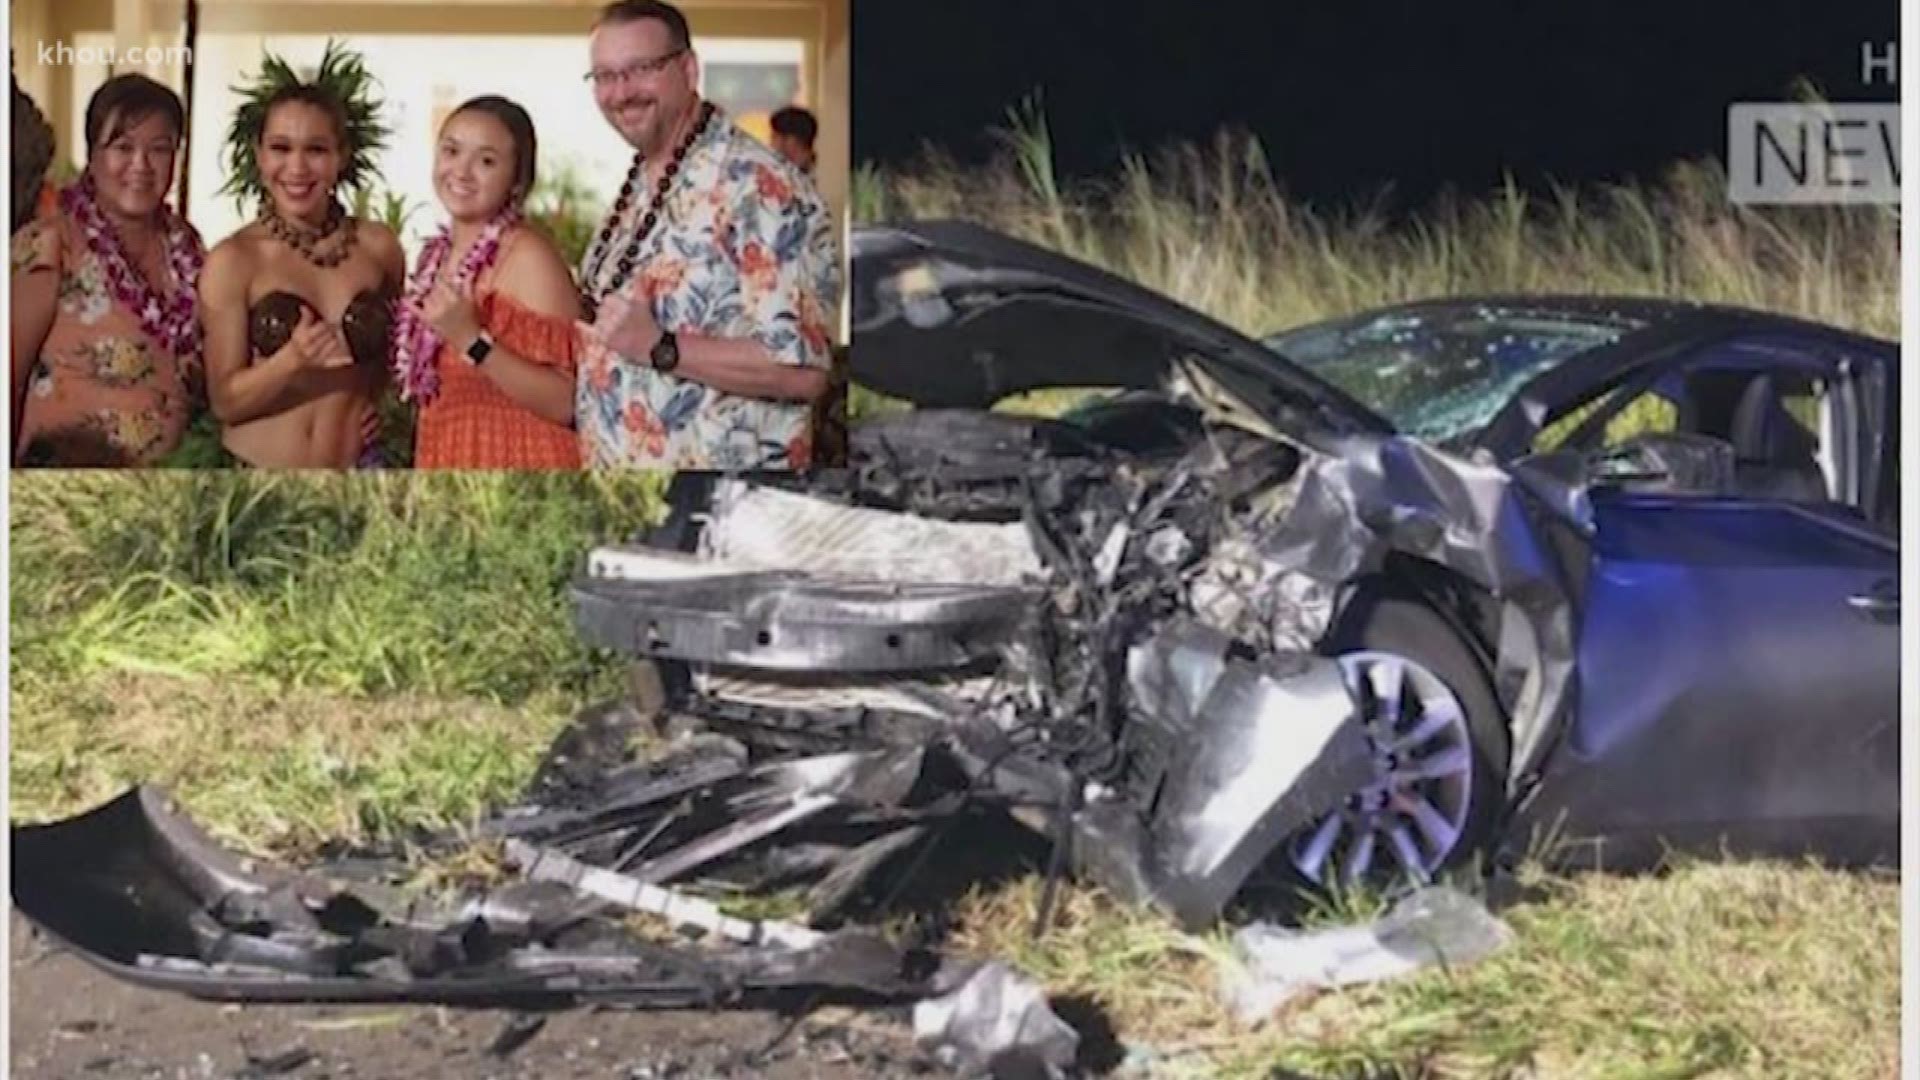 A Spring woman was killed Sunday in a car crash on the way to an airport in Maui.